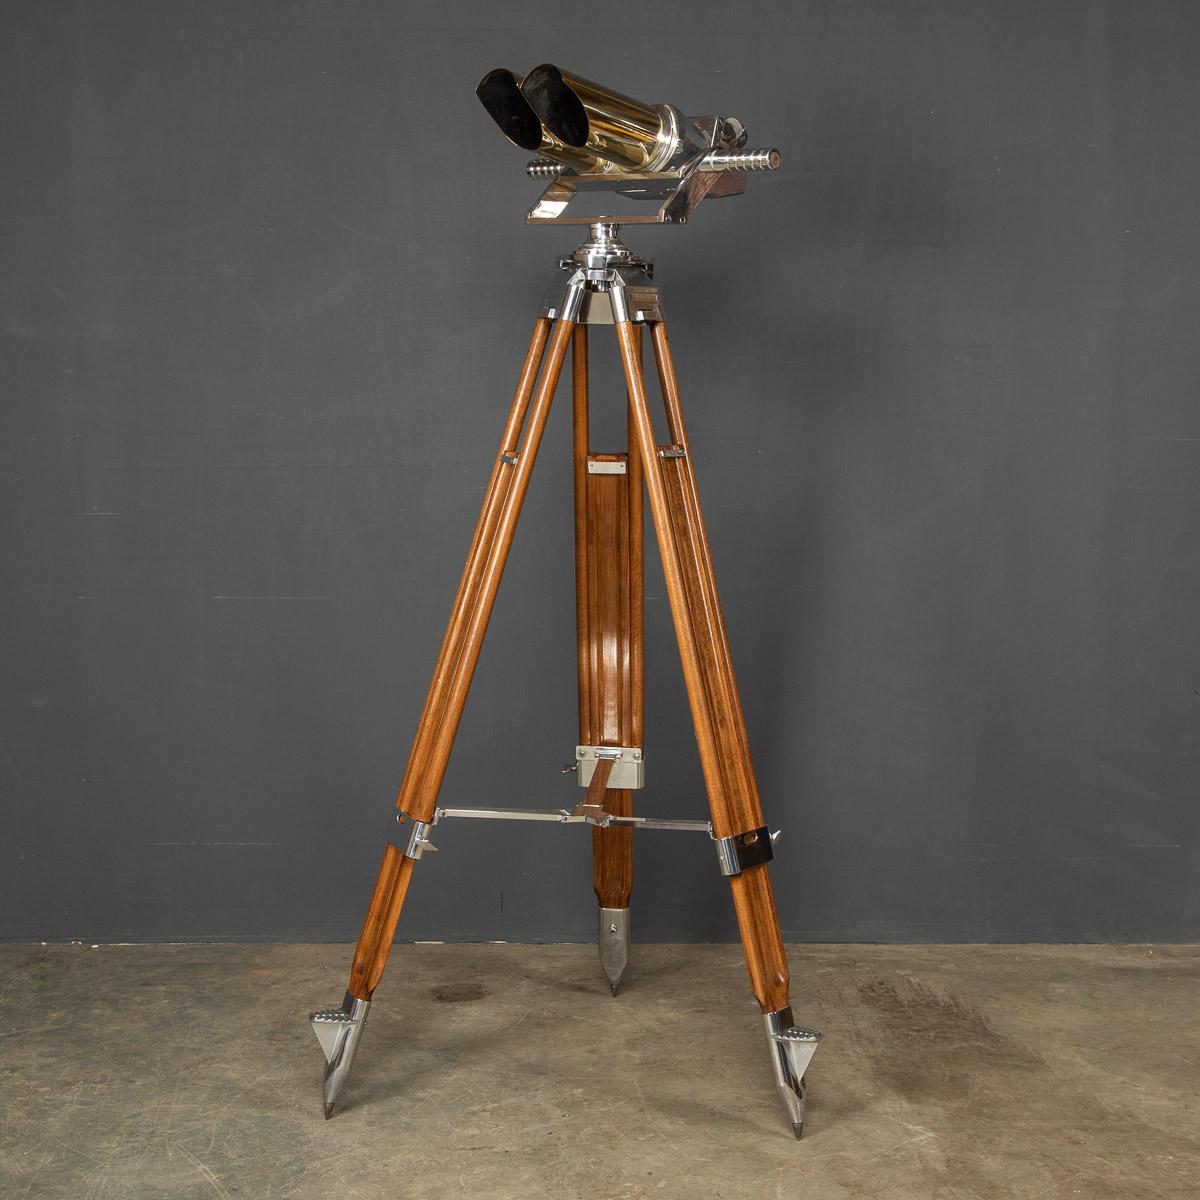 Exceptional 20th Century German polished steel observation telescope binoculars on a later telescopic stand by Joseph Schneider. This model was originally designed by Emil Busch and it has been adopted by the military in 1936.

CONDITION
In Great